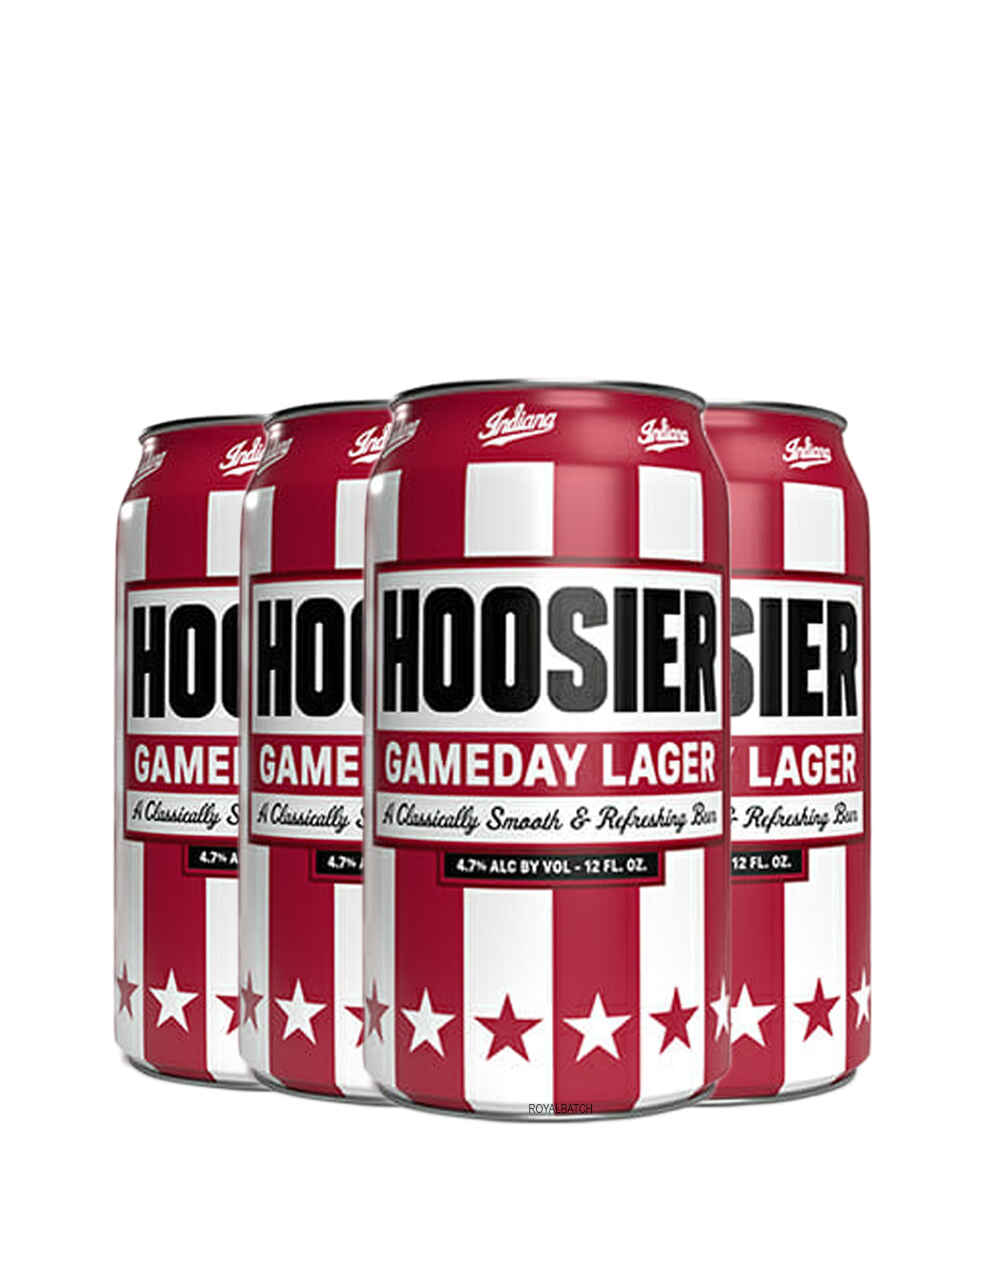 Indiana Hoosier Gameday Lager Cocktail 6 Pack